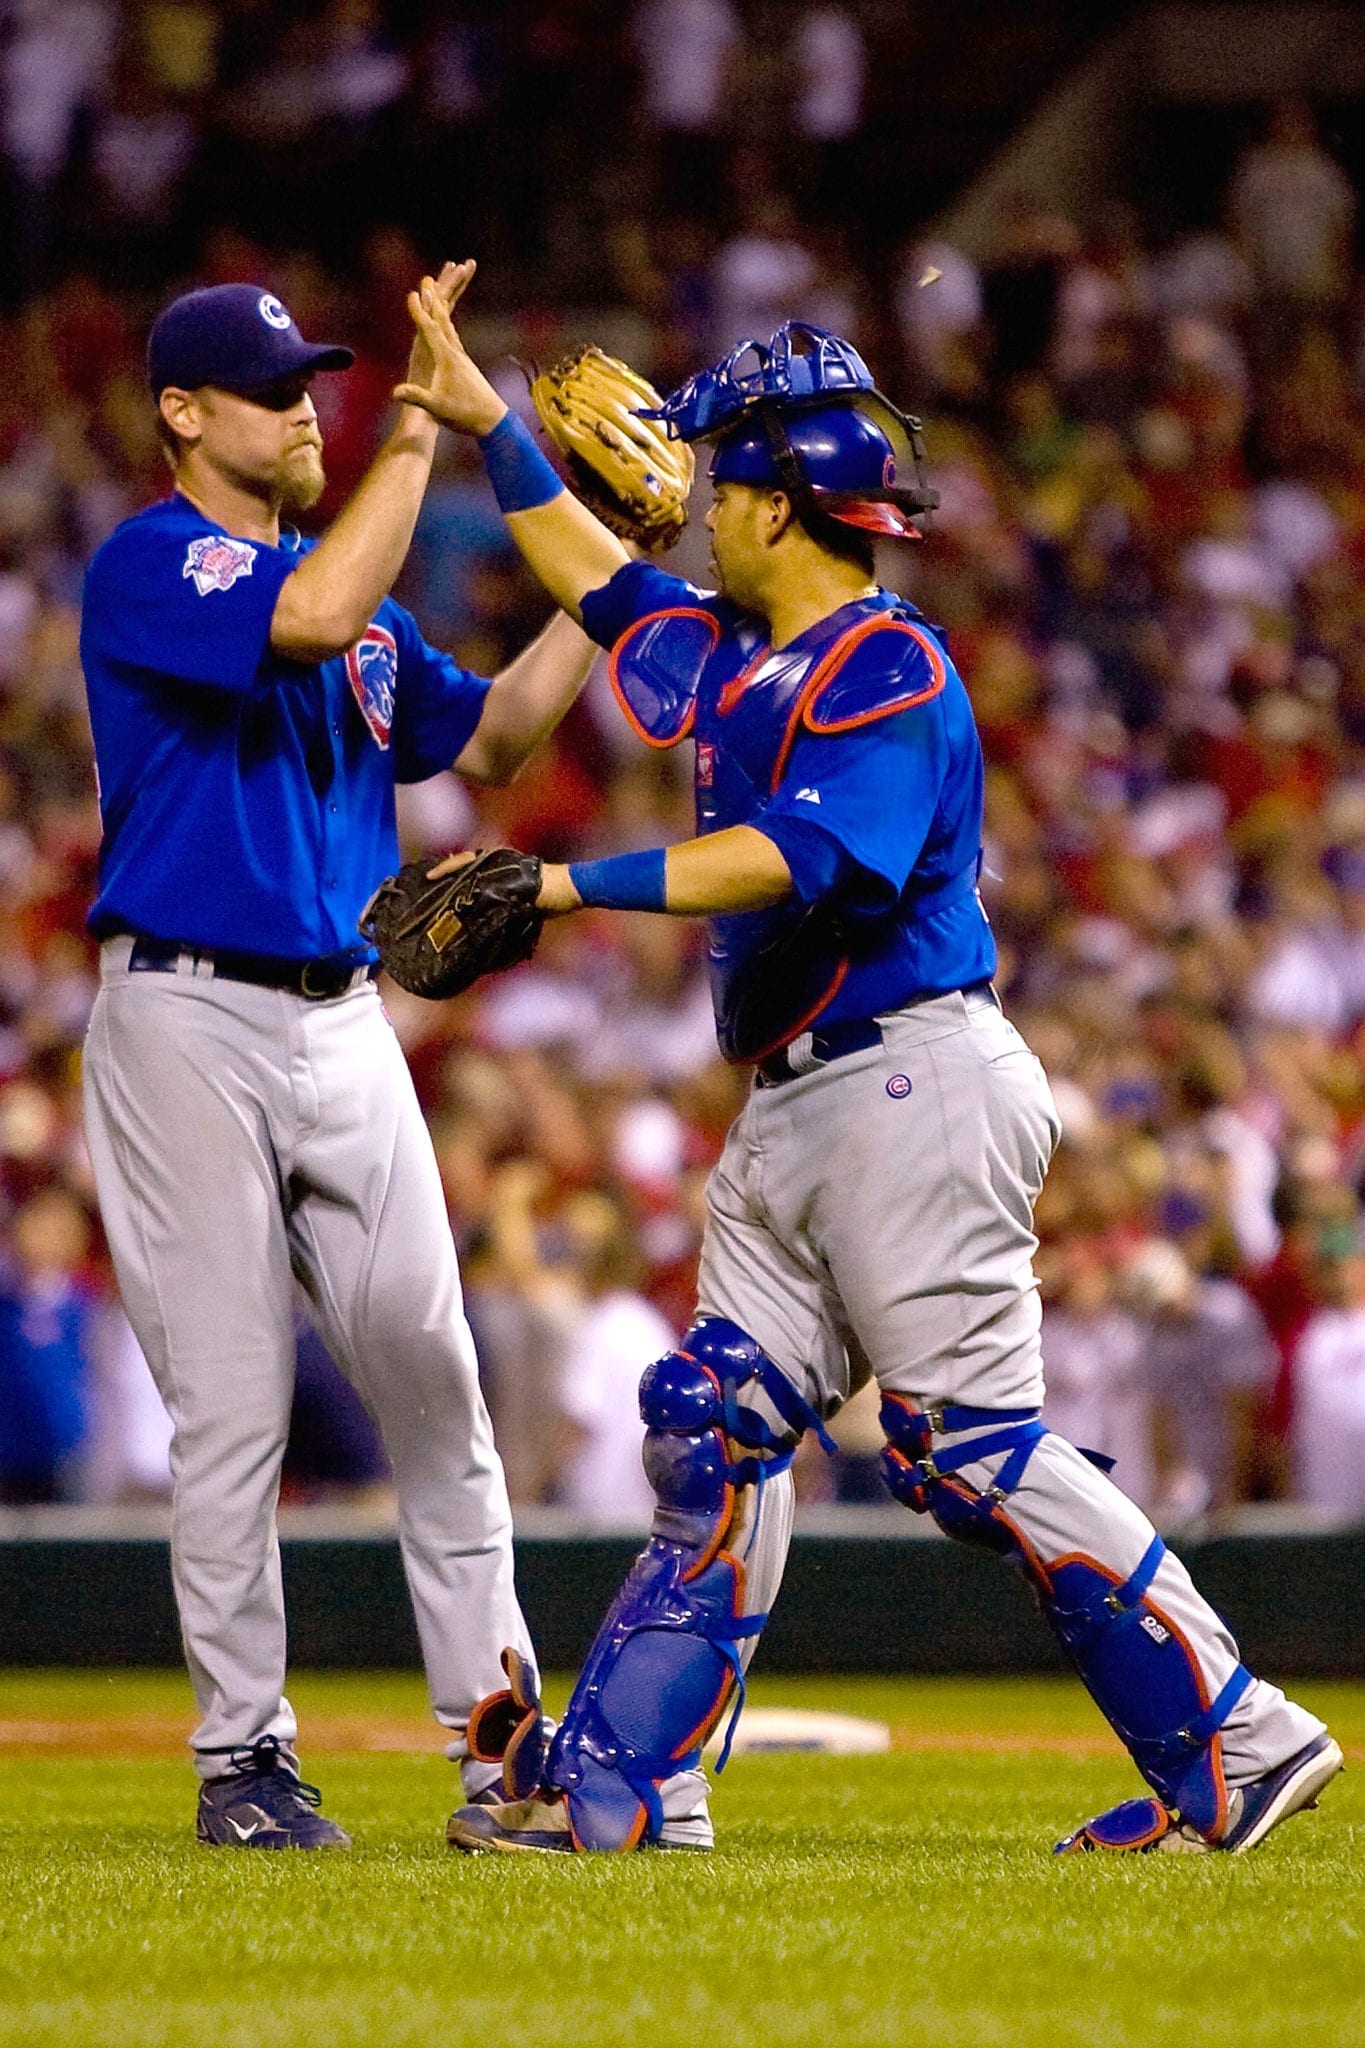 Chicago Cubs V St. Louis Cardinals - Marquee Sports Network - Television Home of the Chicago Cubs